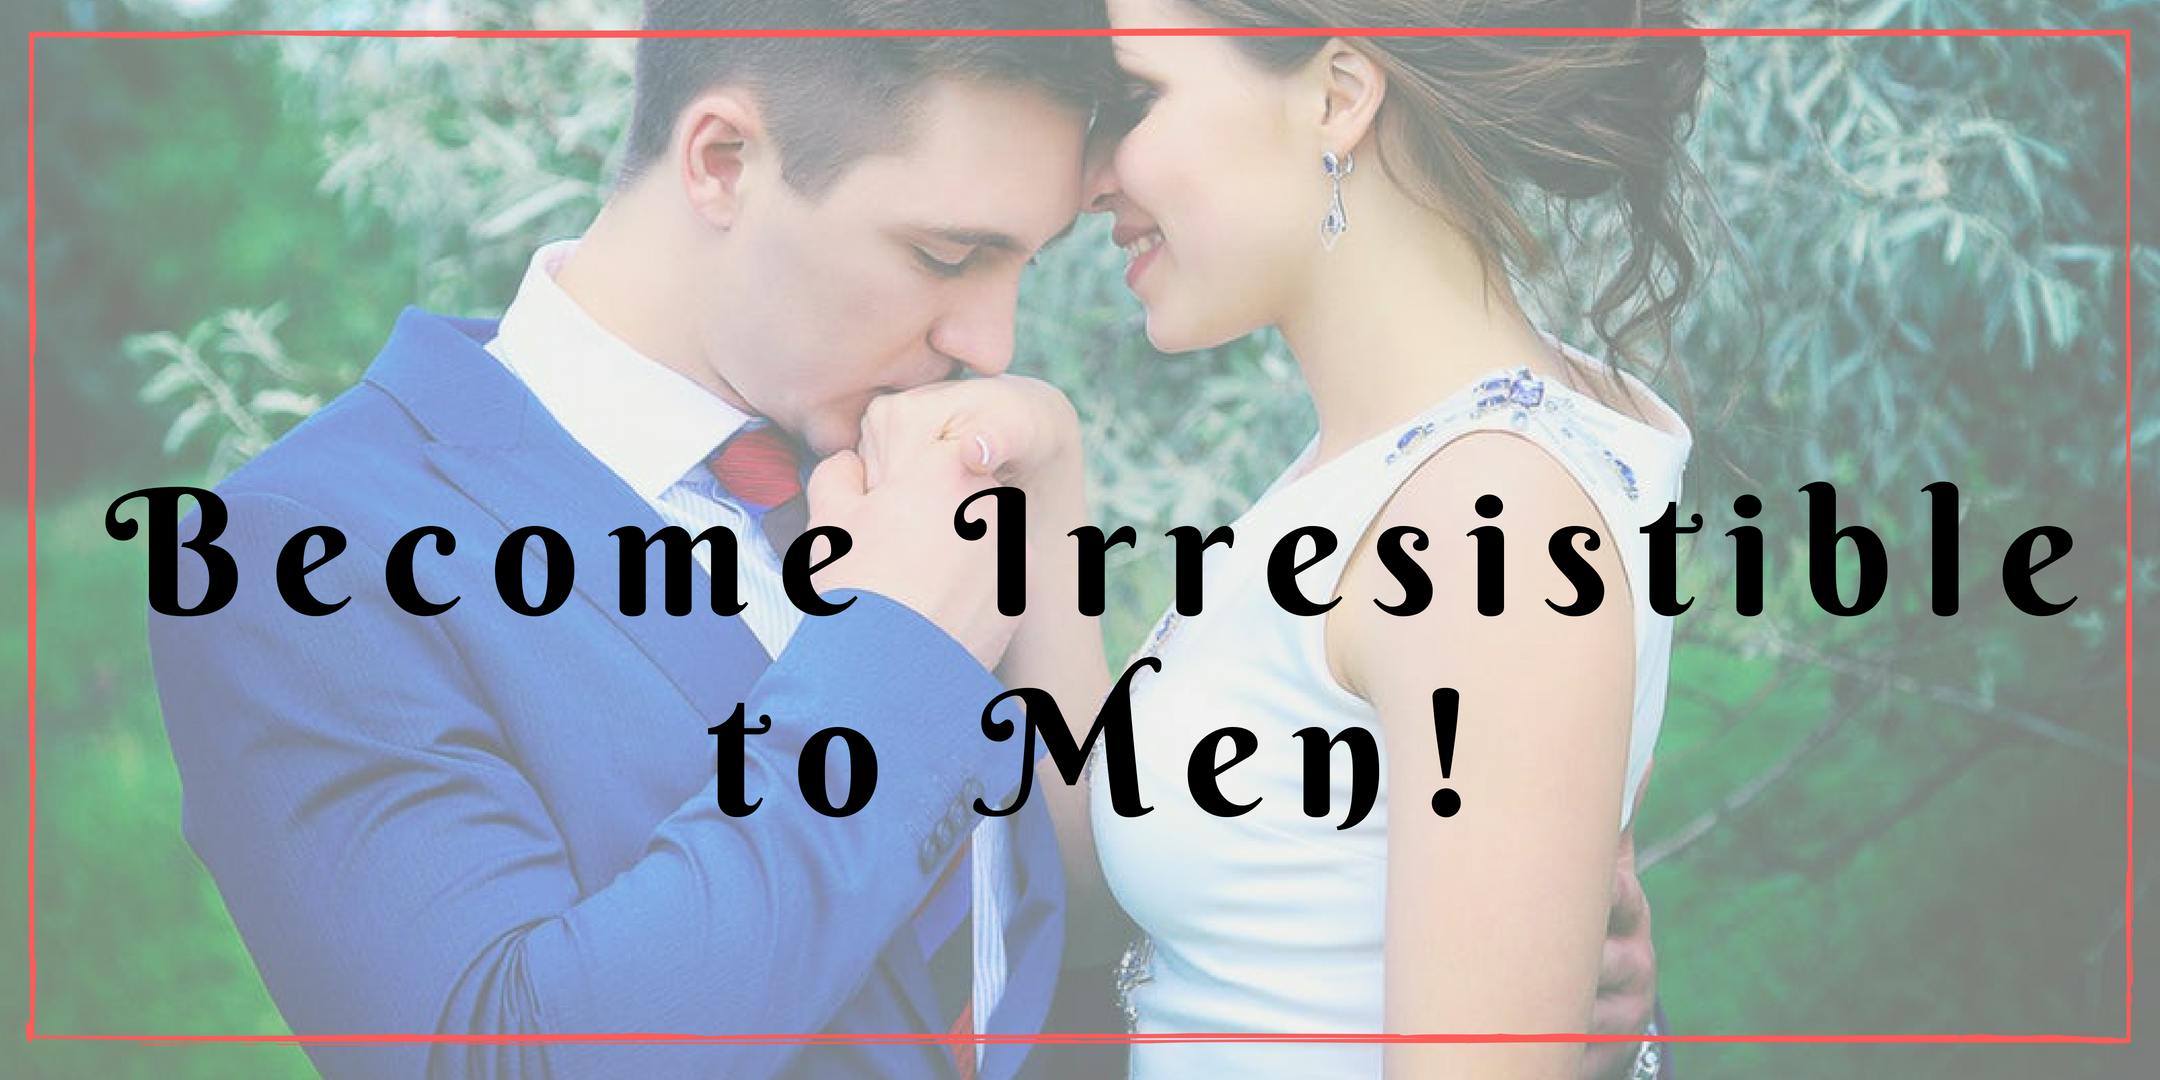 Irresistible 101 - An online Masterclass for Women Looking for Men